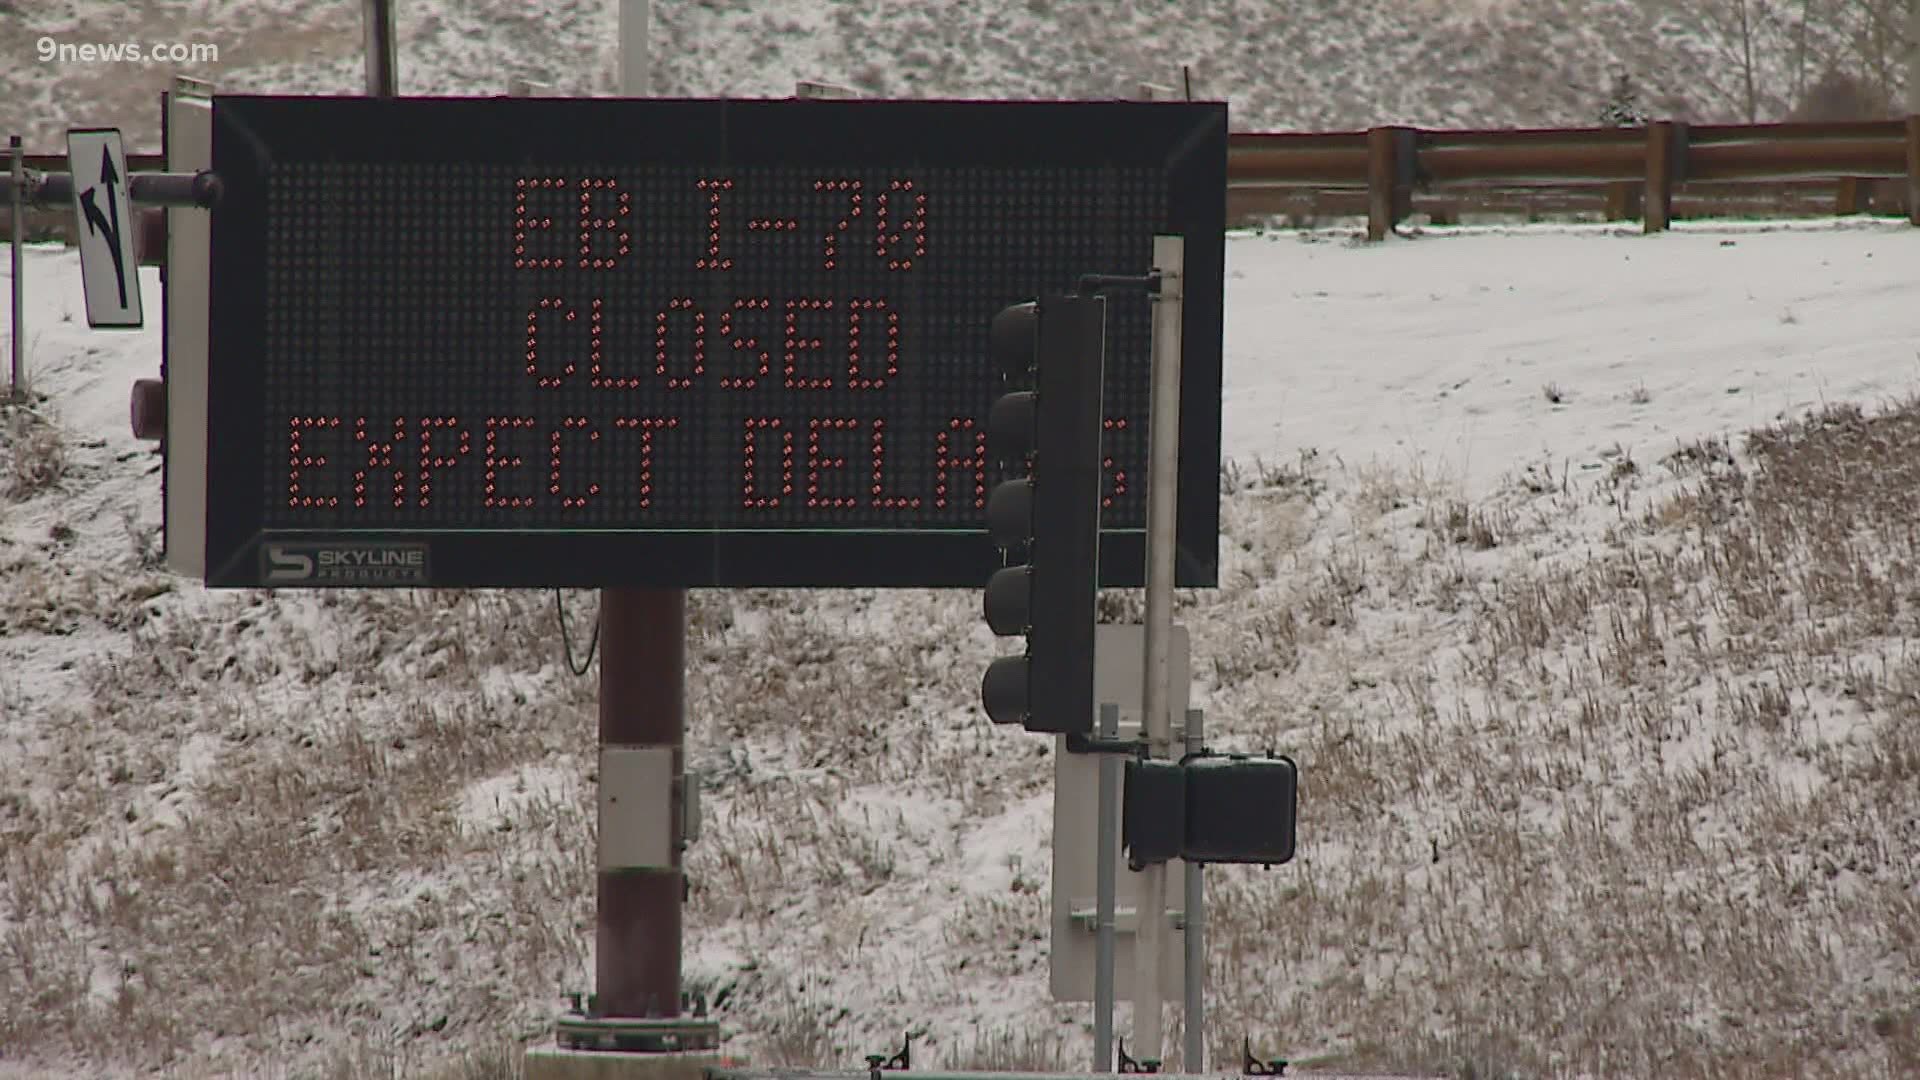 It didn't take much snow to cause problems along I-70 on Monday.